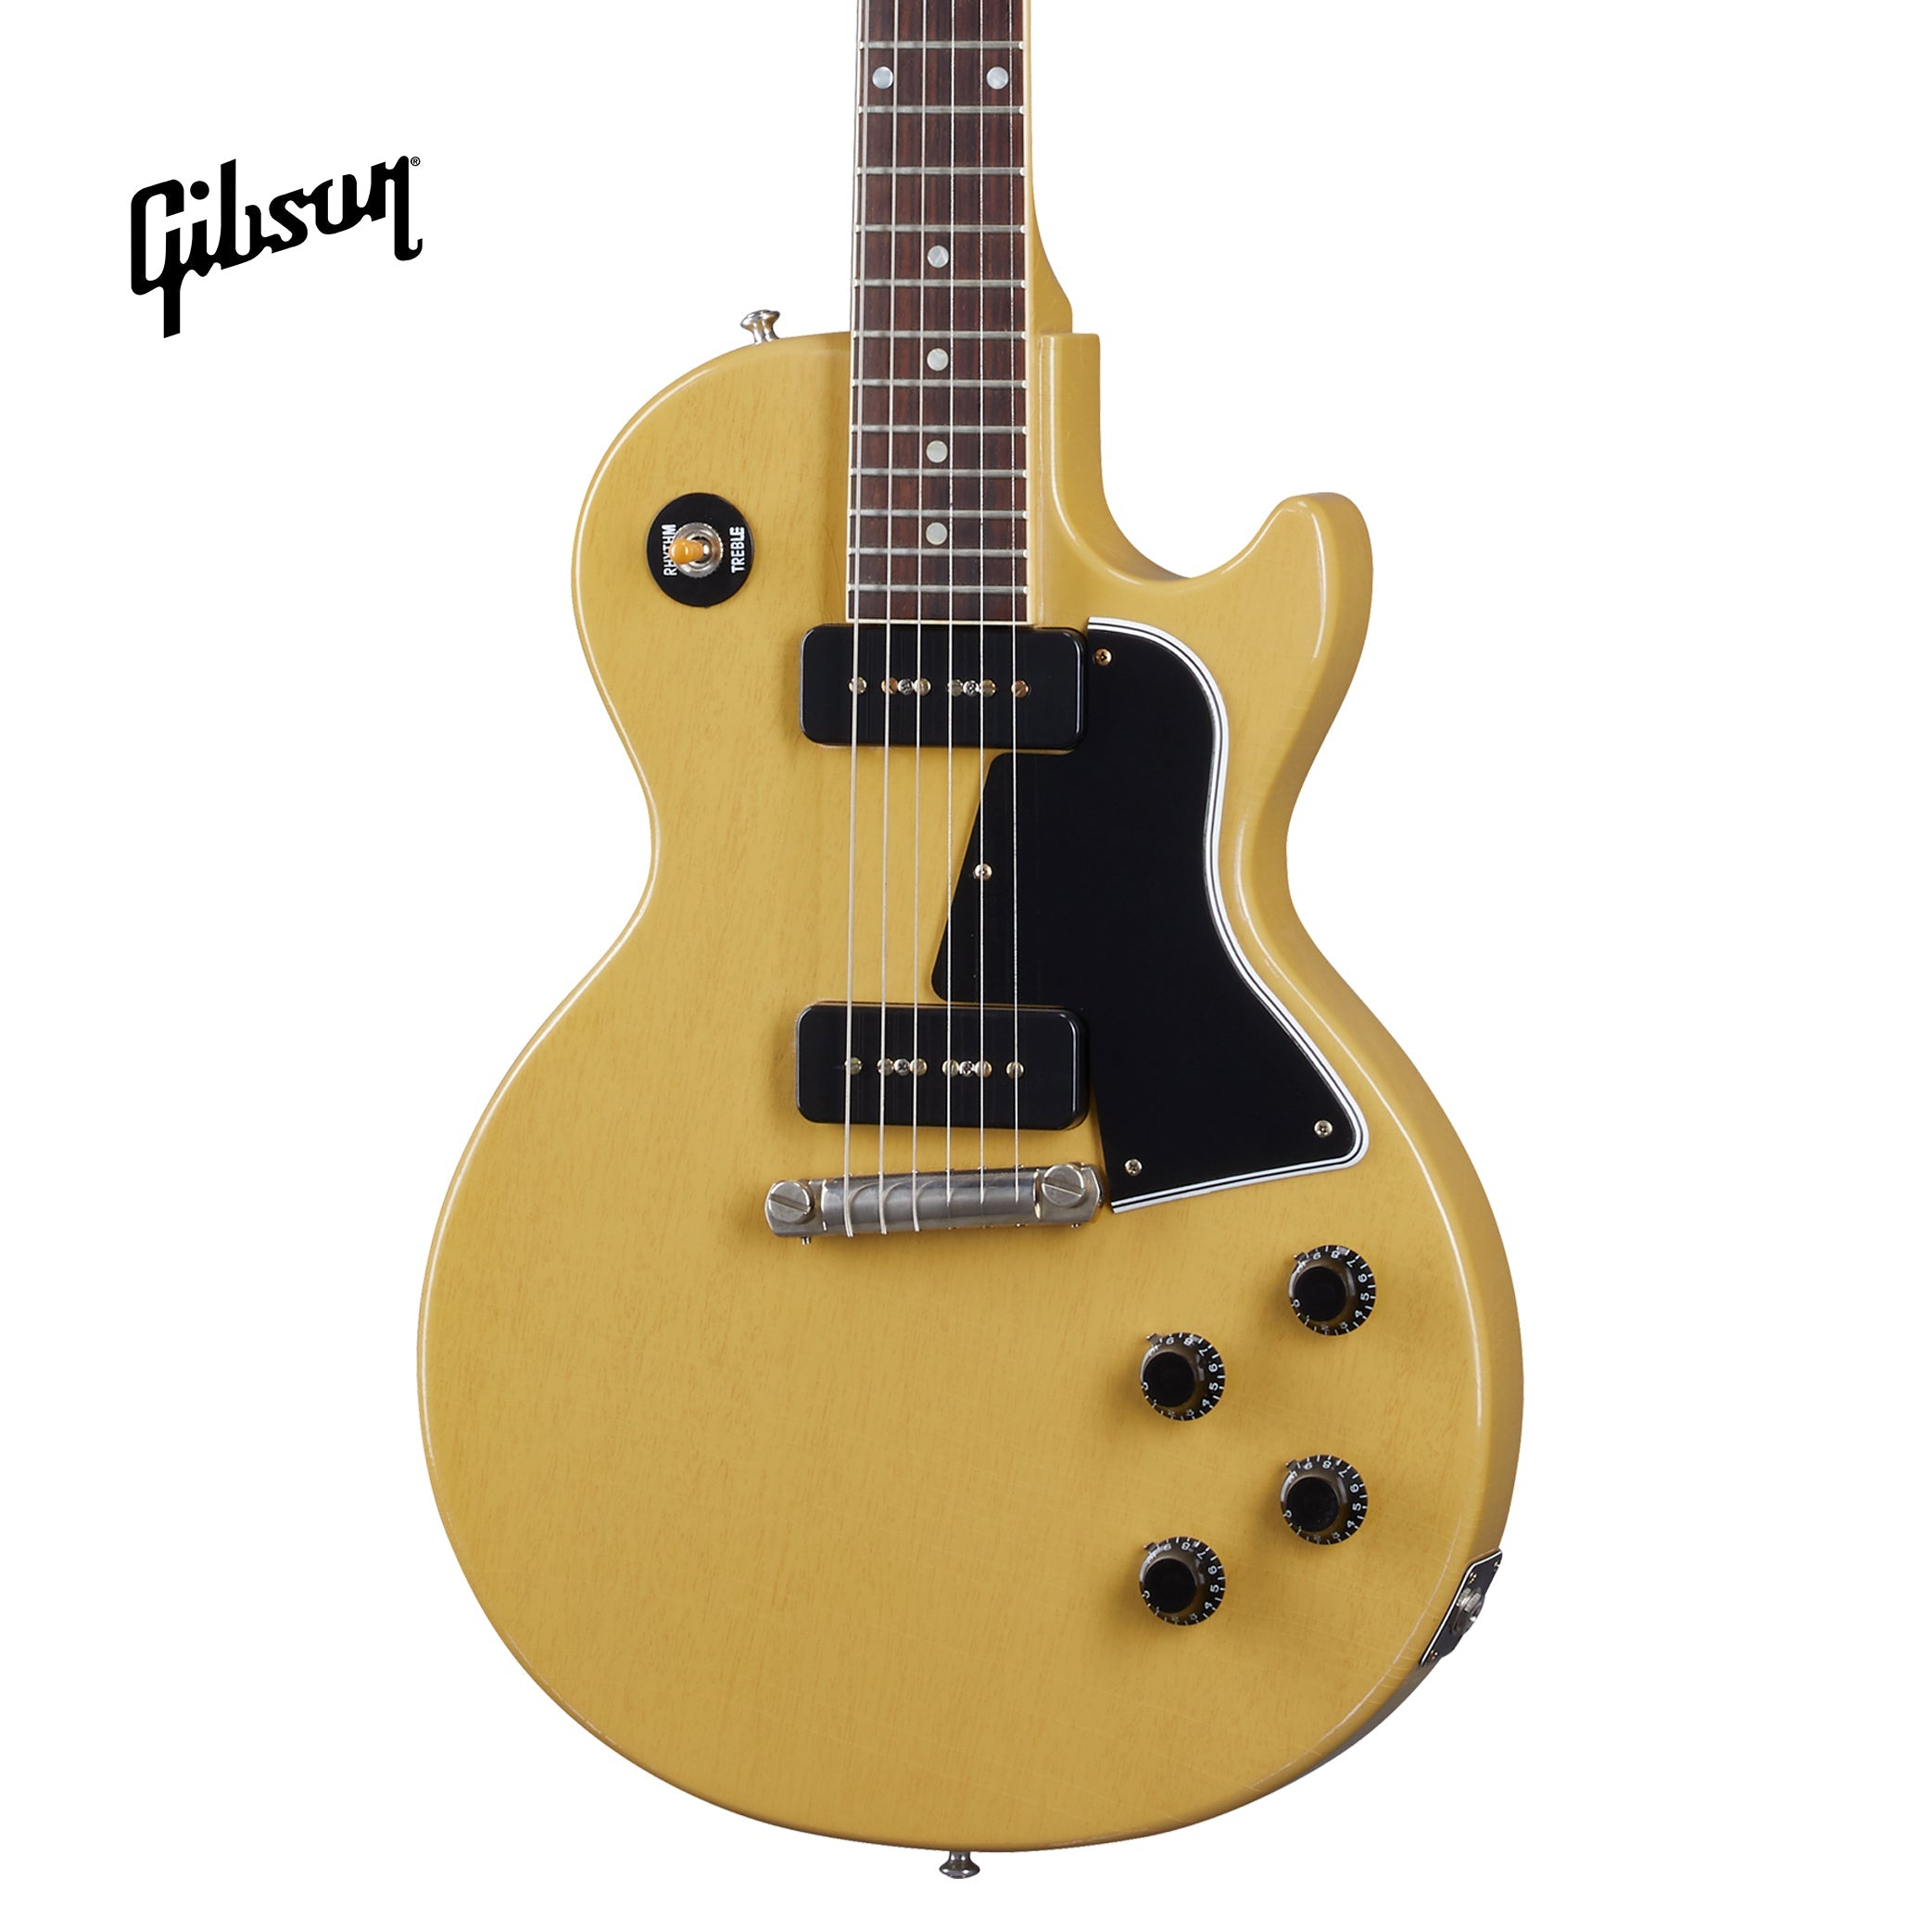 GIBSON 1957 LES PAUL SPECIAL SINGLE CUT REISSUE ULTRA LIGHT AGED ELECTRIC GUITAR - TV YELLOW